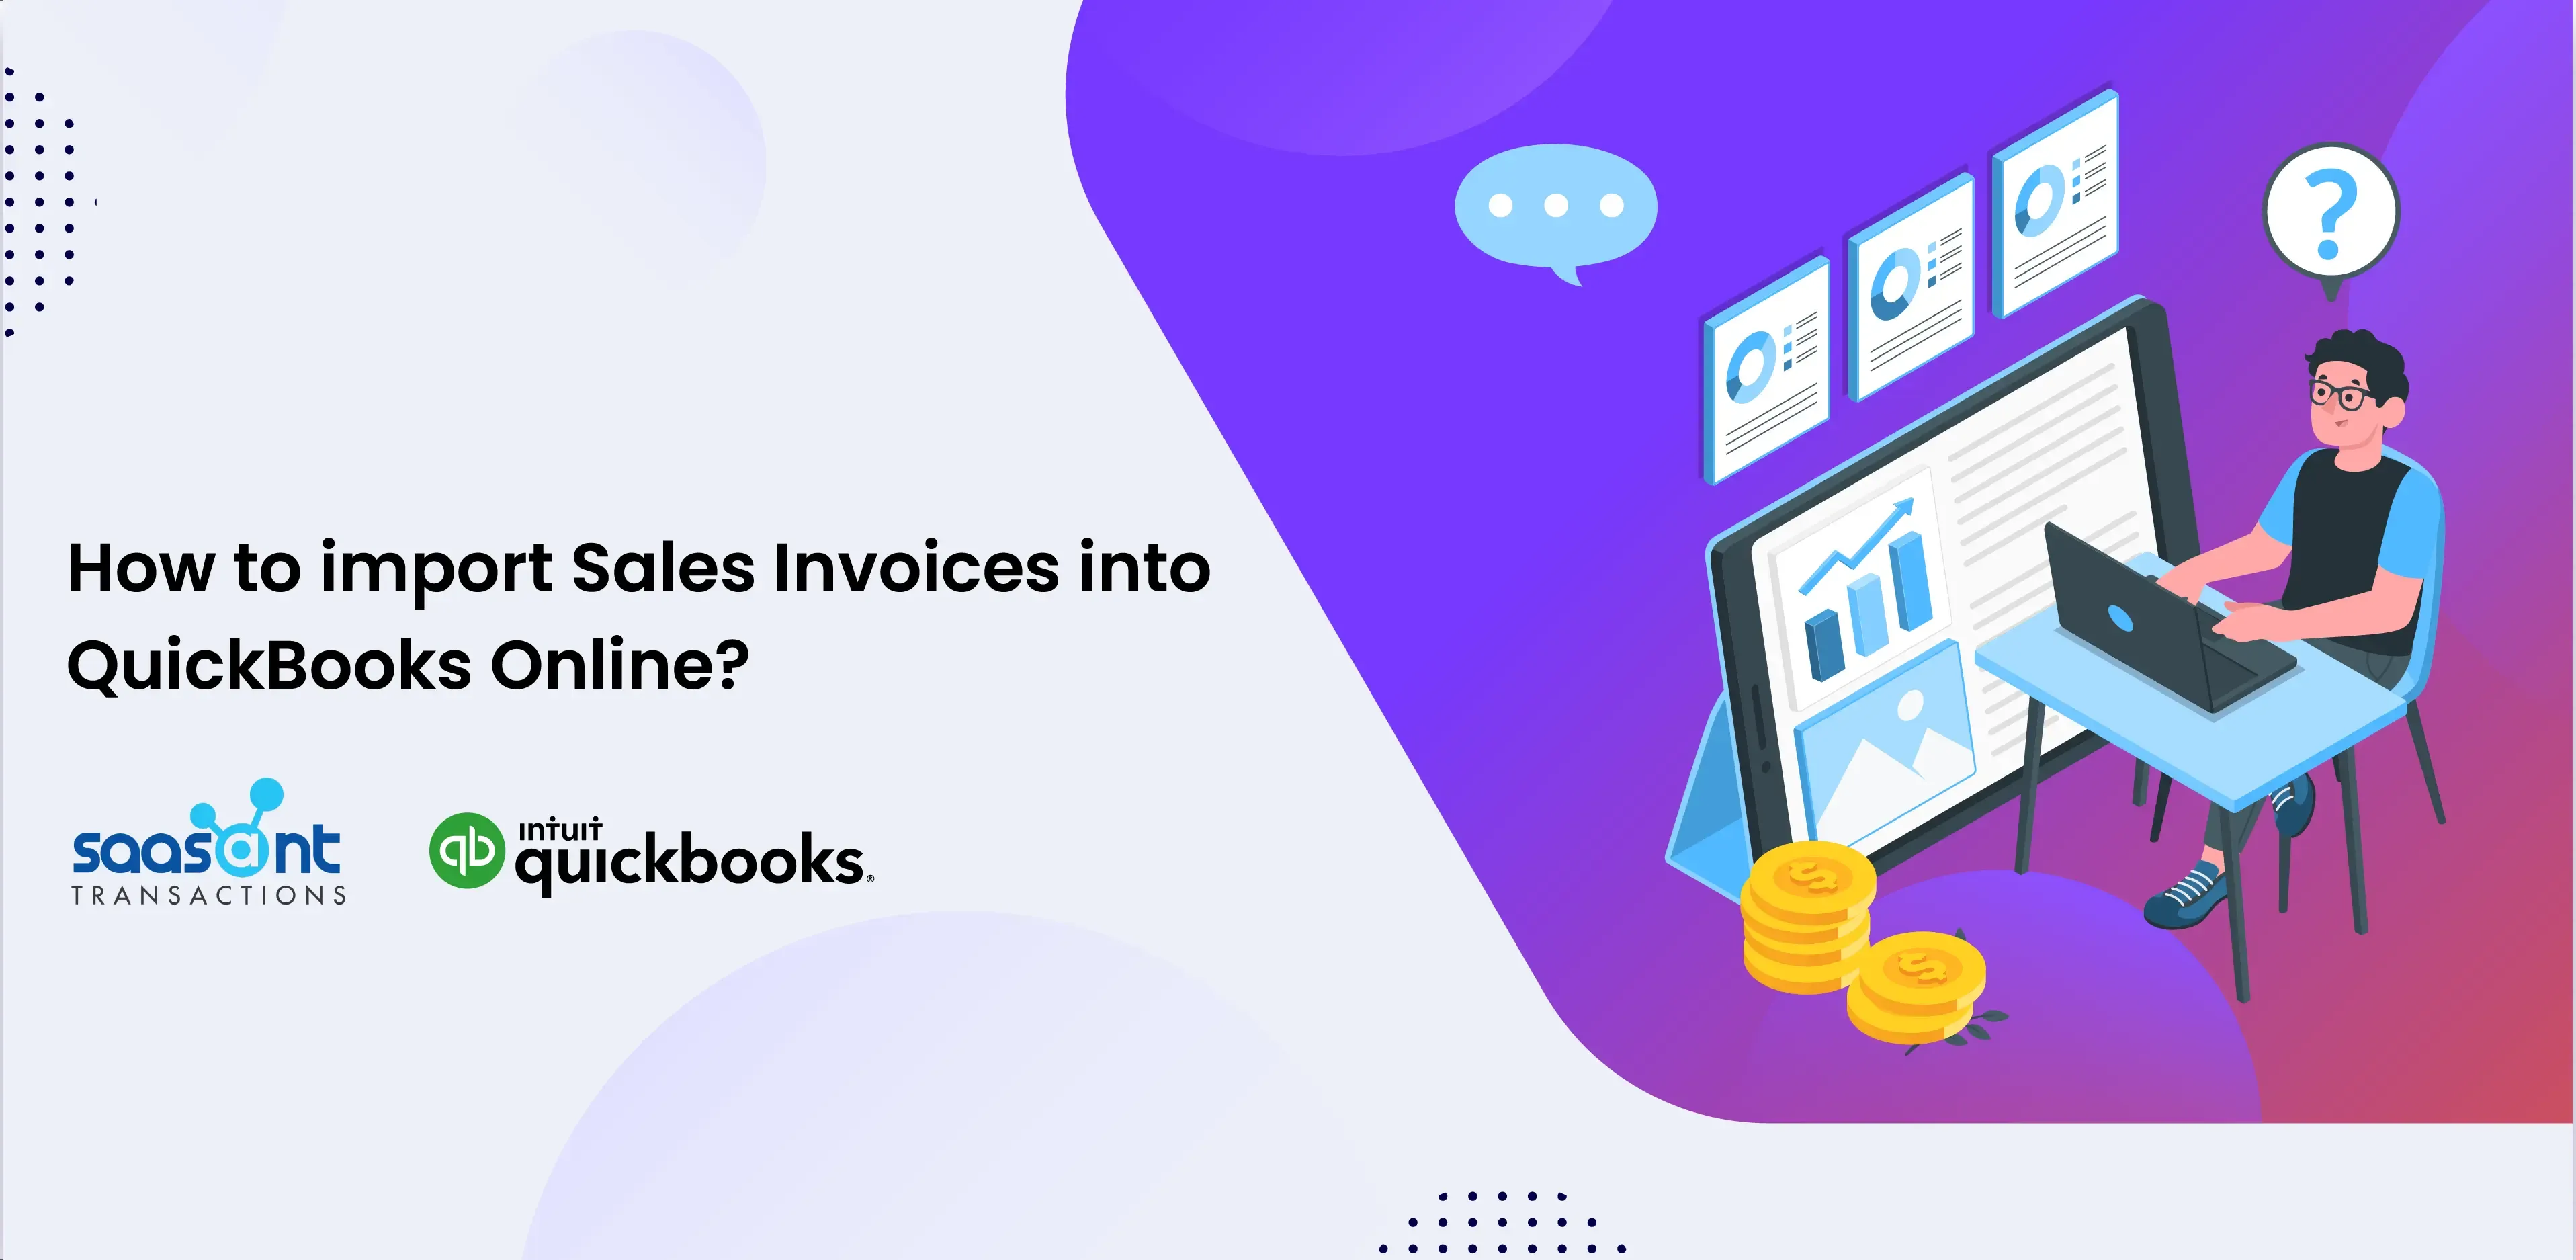 blog_images1703128757901_How-to-import-Sales-Invoices-into-QuickBooks-Online_.webp